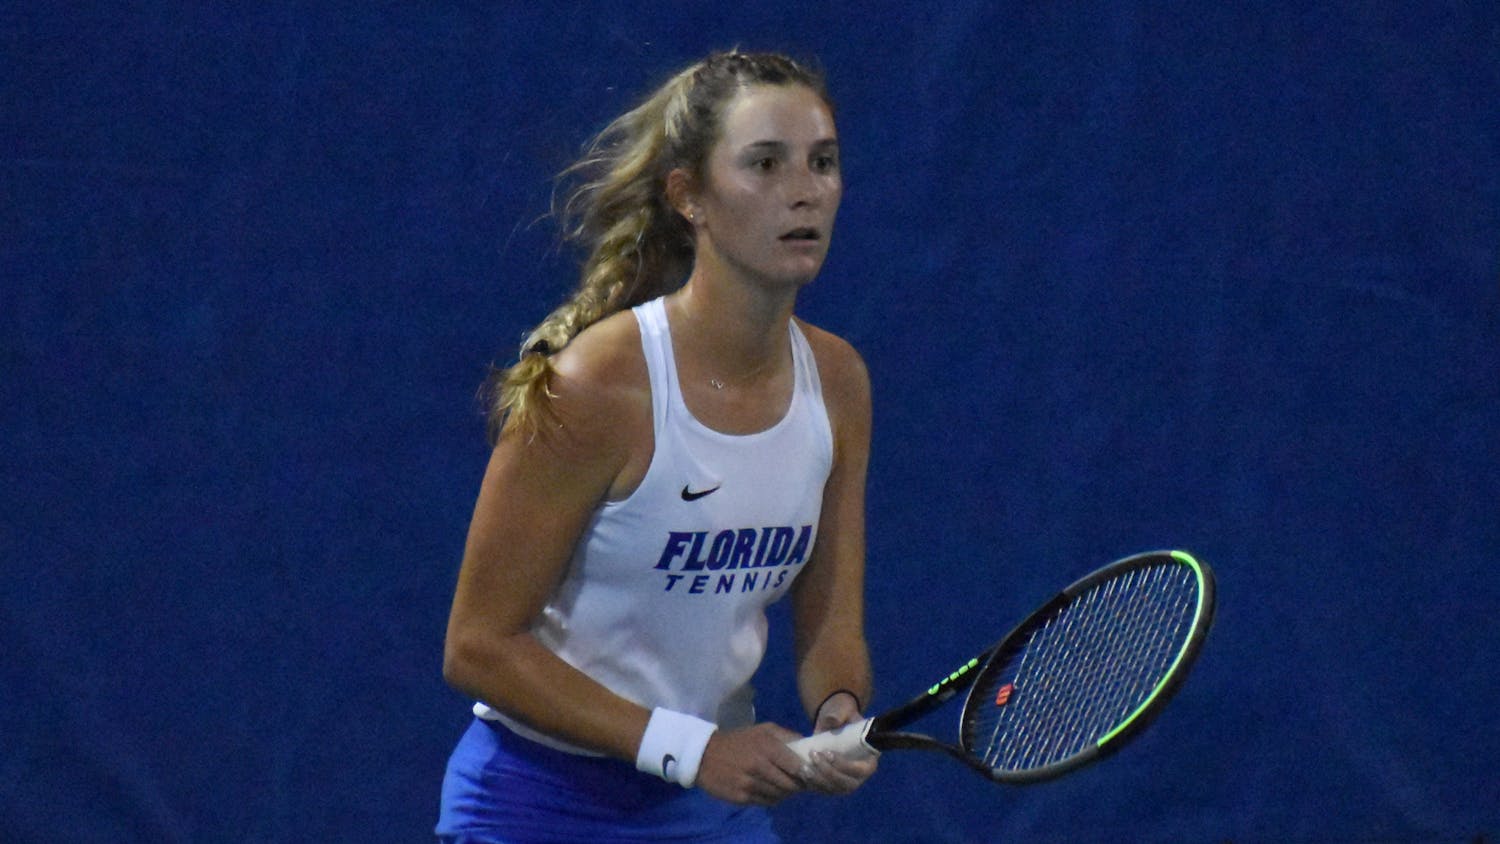 The Gators suffered two brutal losses to No. 22 UCF 4-3, 5-2 and No. 8 FSU 4-1.
